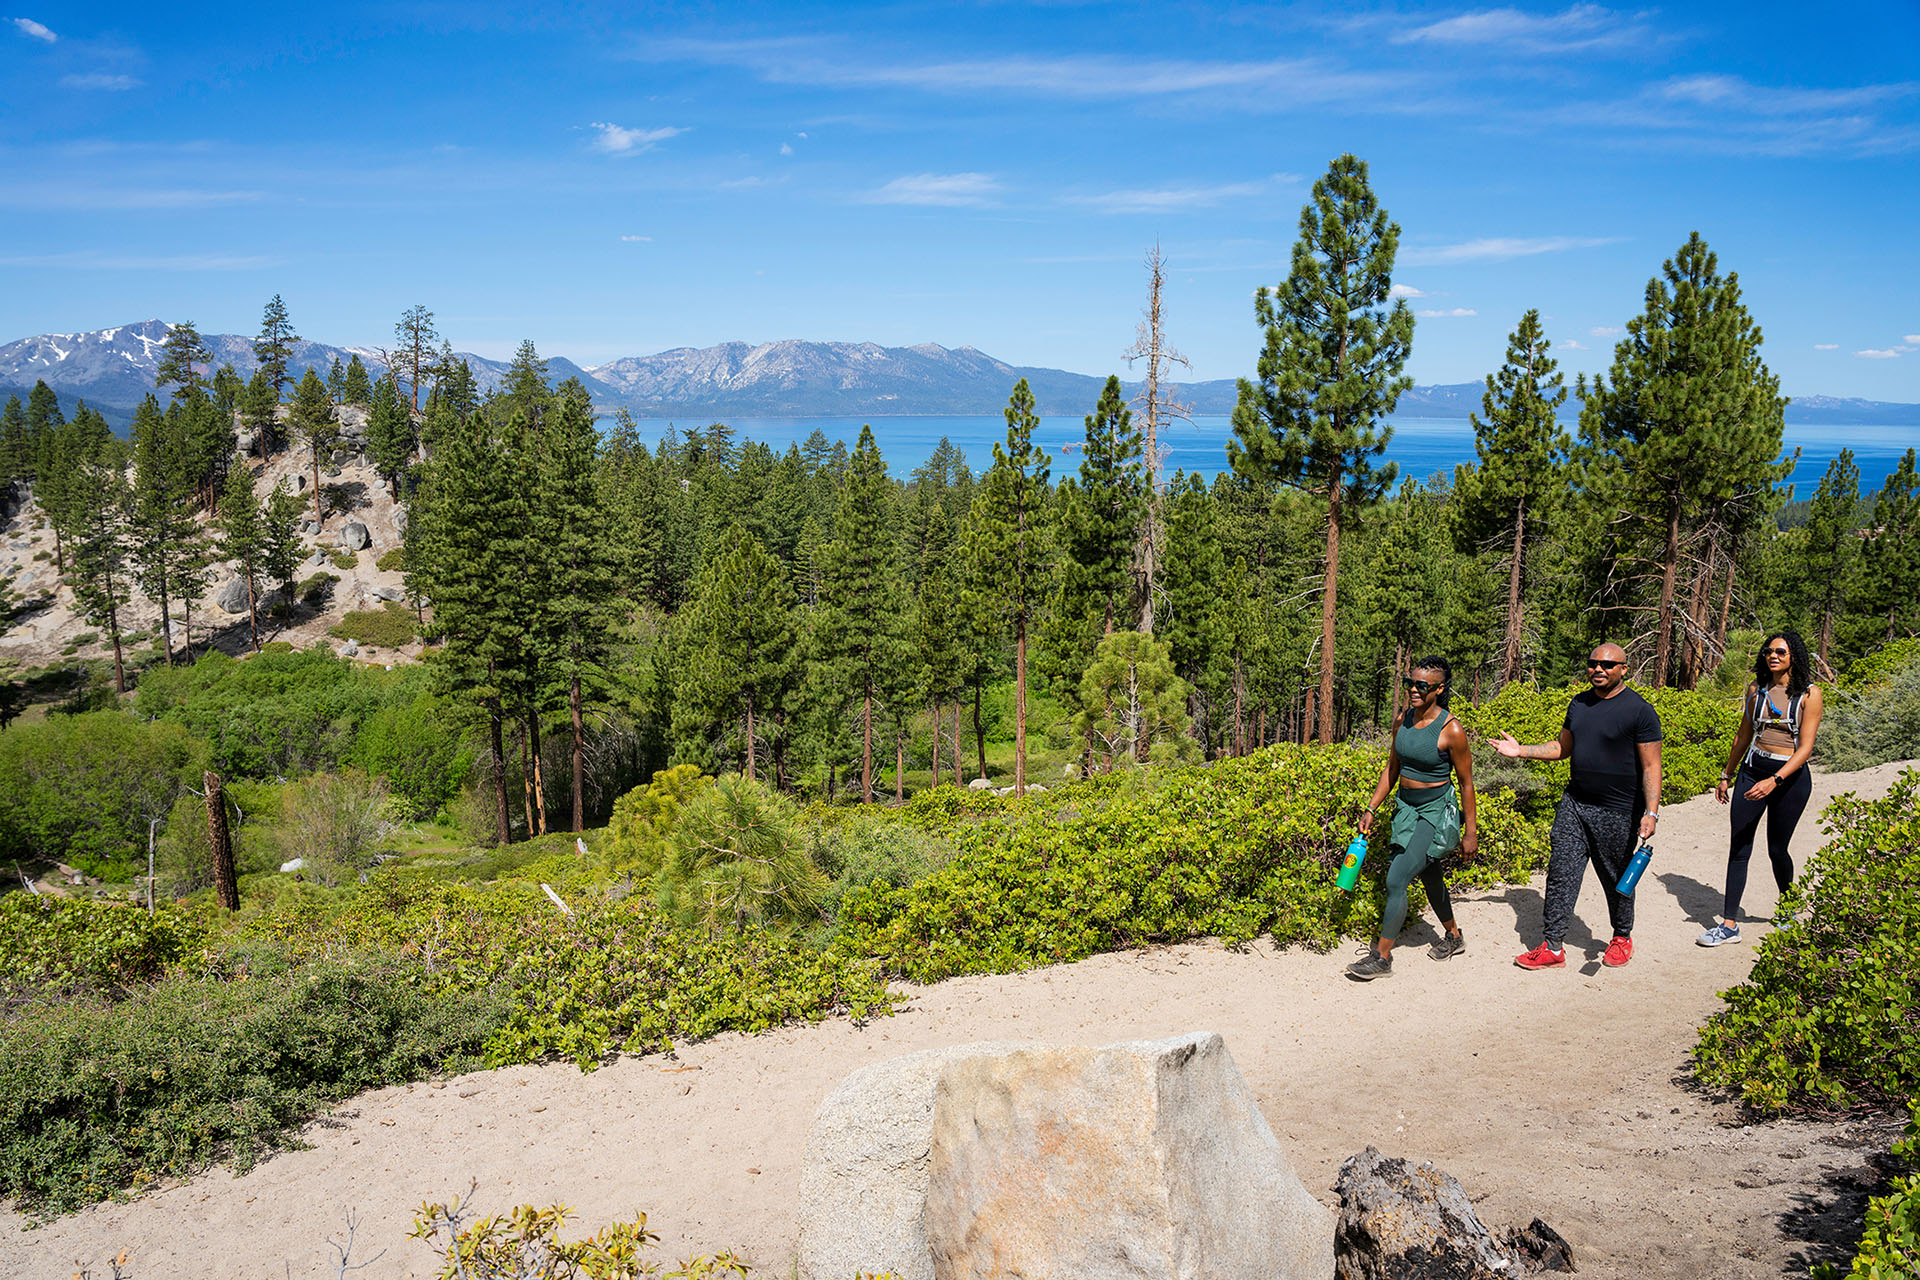 People enjoying a hiking trail at Van Sickle Bi-State Park, with Lake Tahoe in the background.